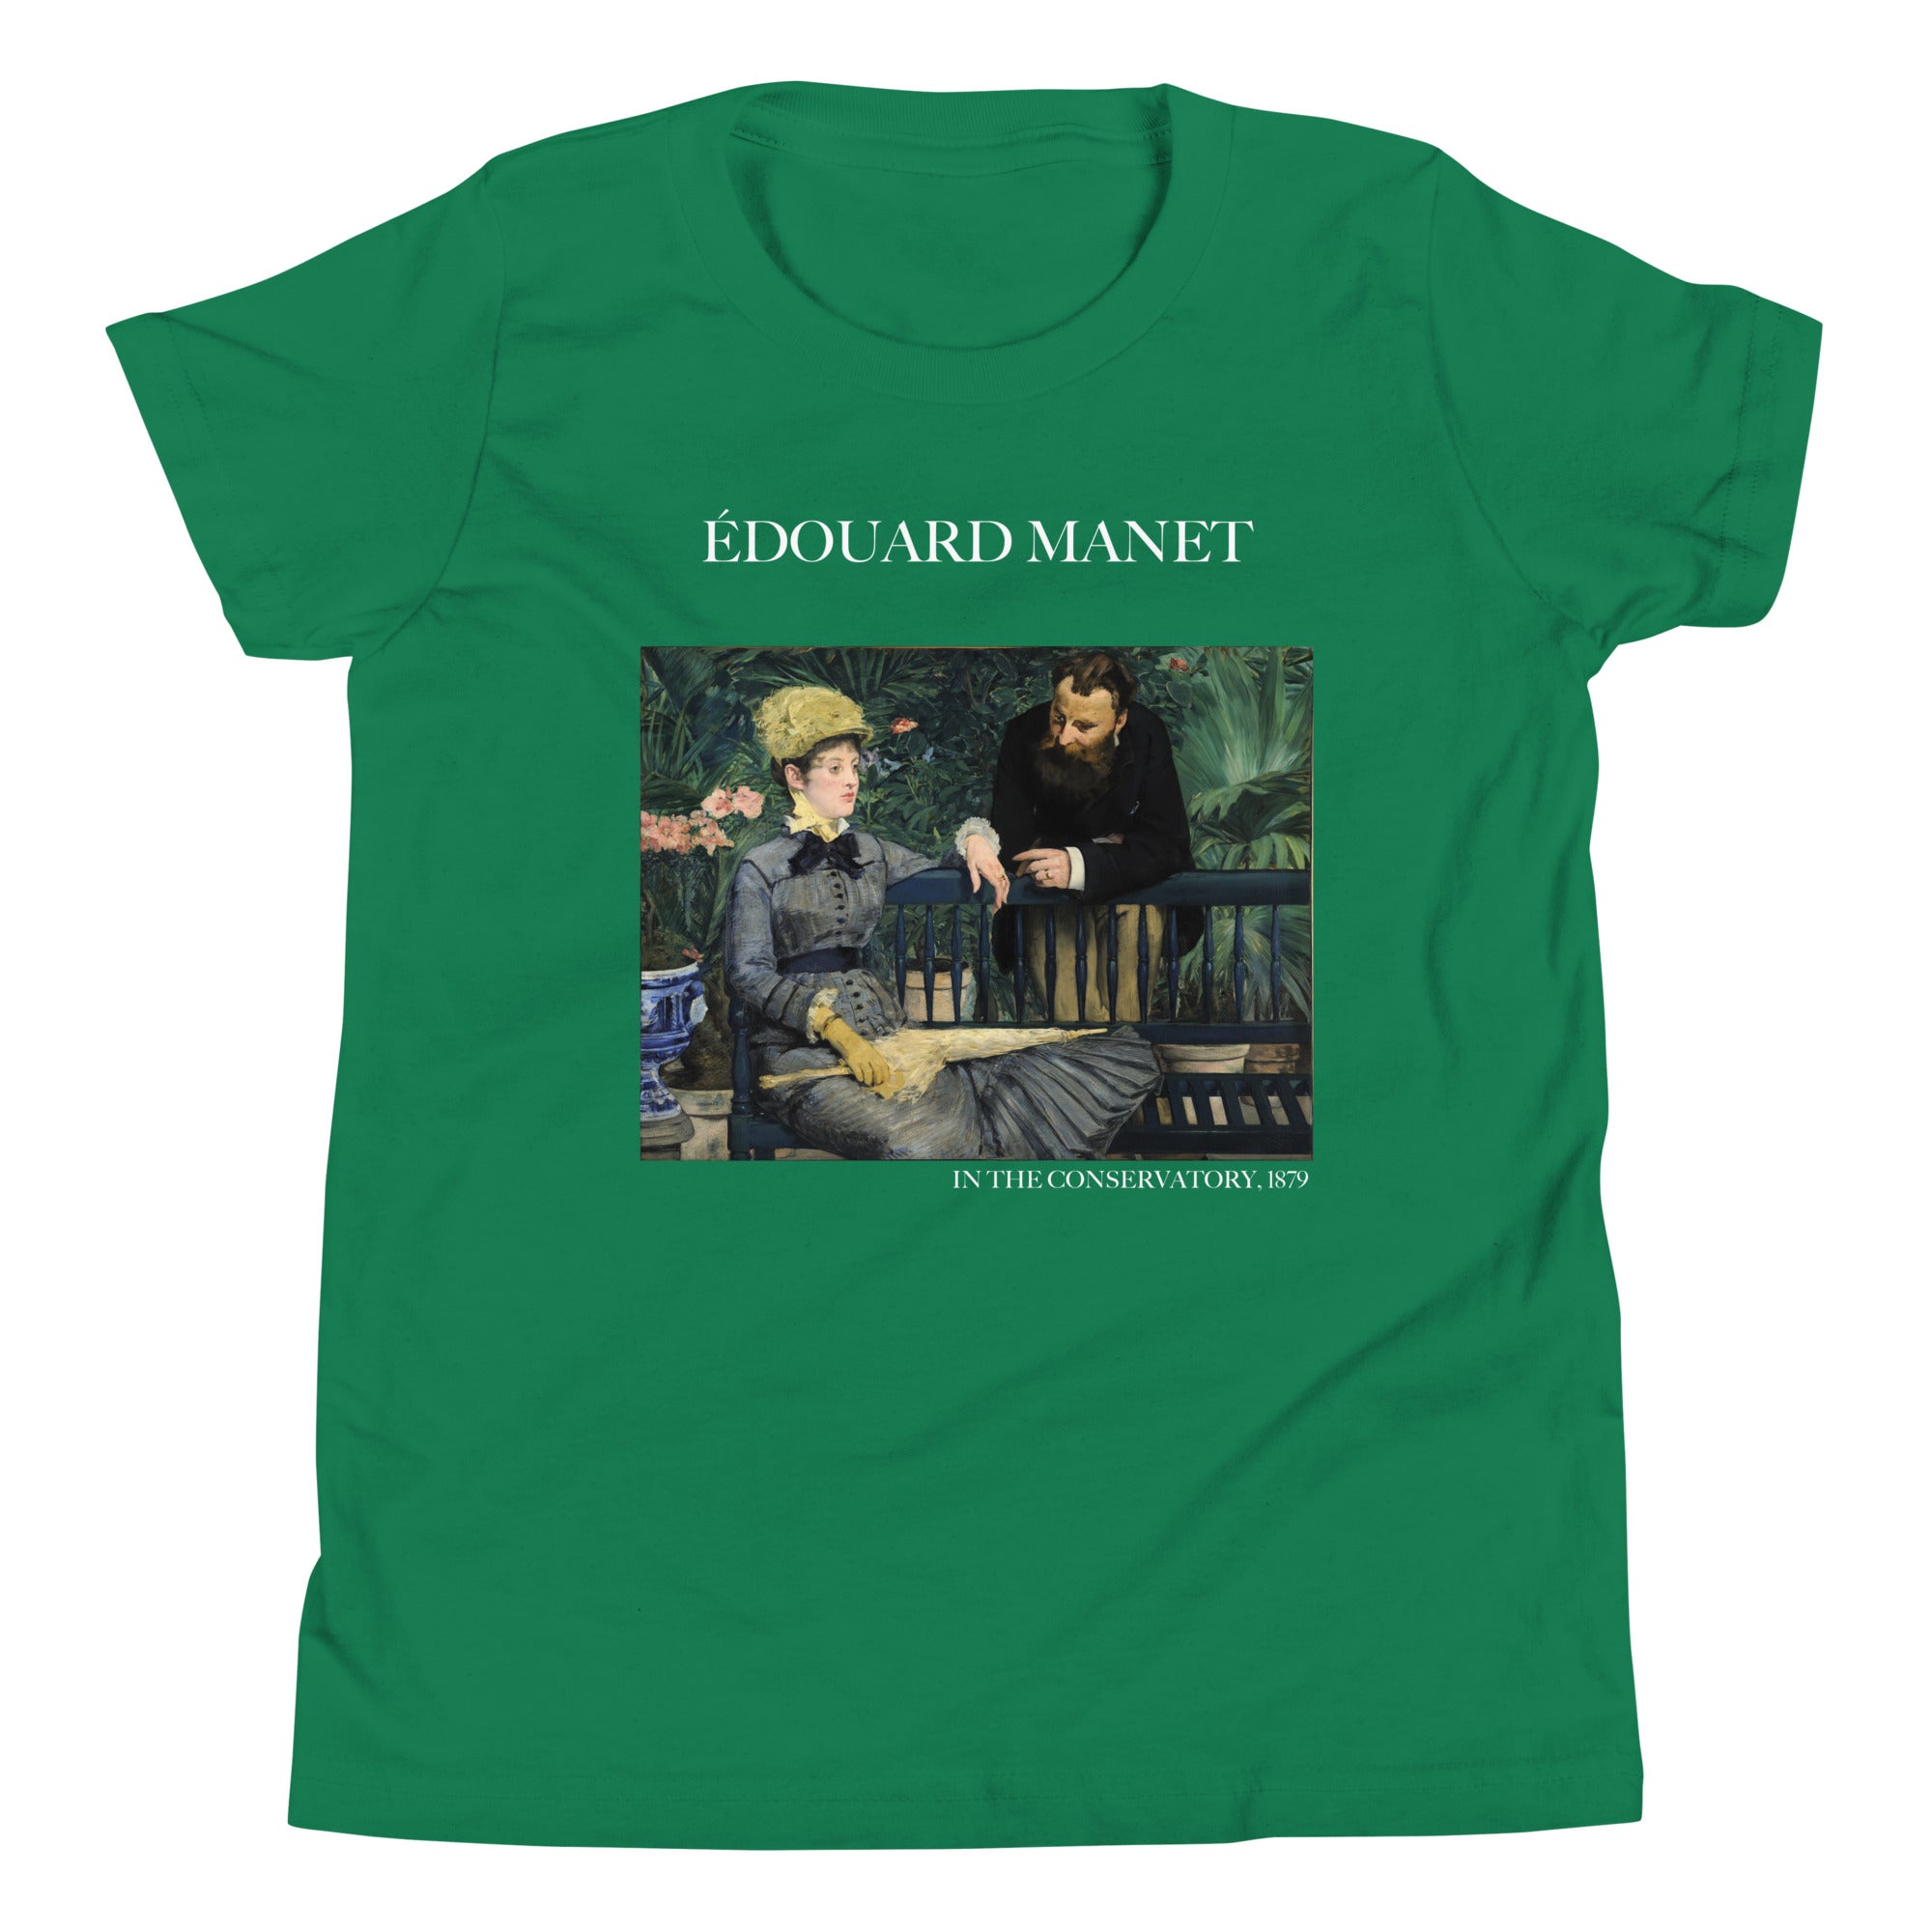 Édouard Manet 'In the Conservatory' Famous Painting Short Sleeve T-Shirt | Premium Youth Art Tee